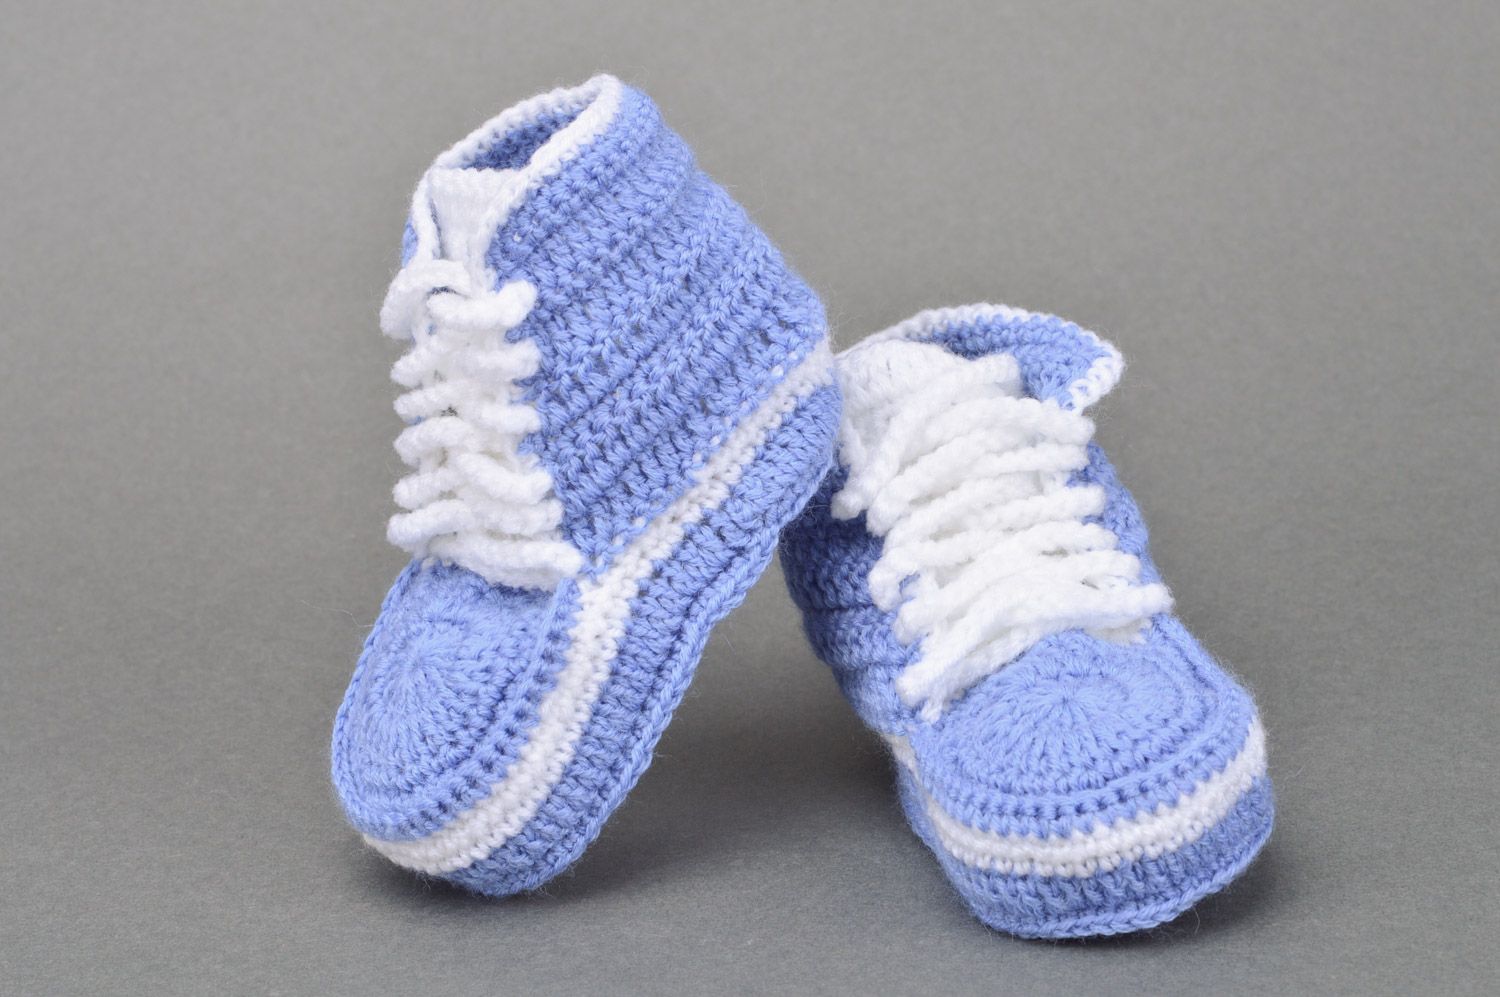 Handmade small crocheted blue baby sneakers with white shoelaces  photo 2